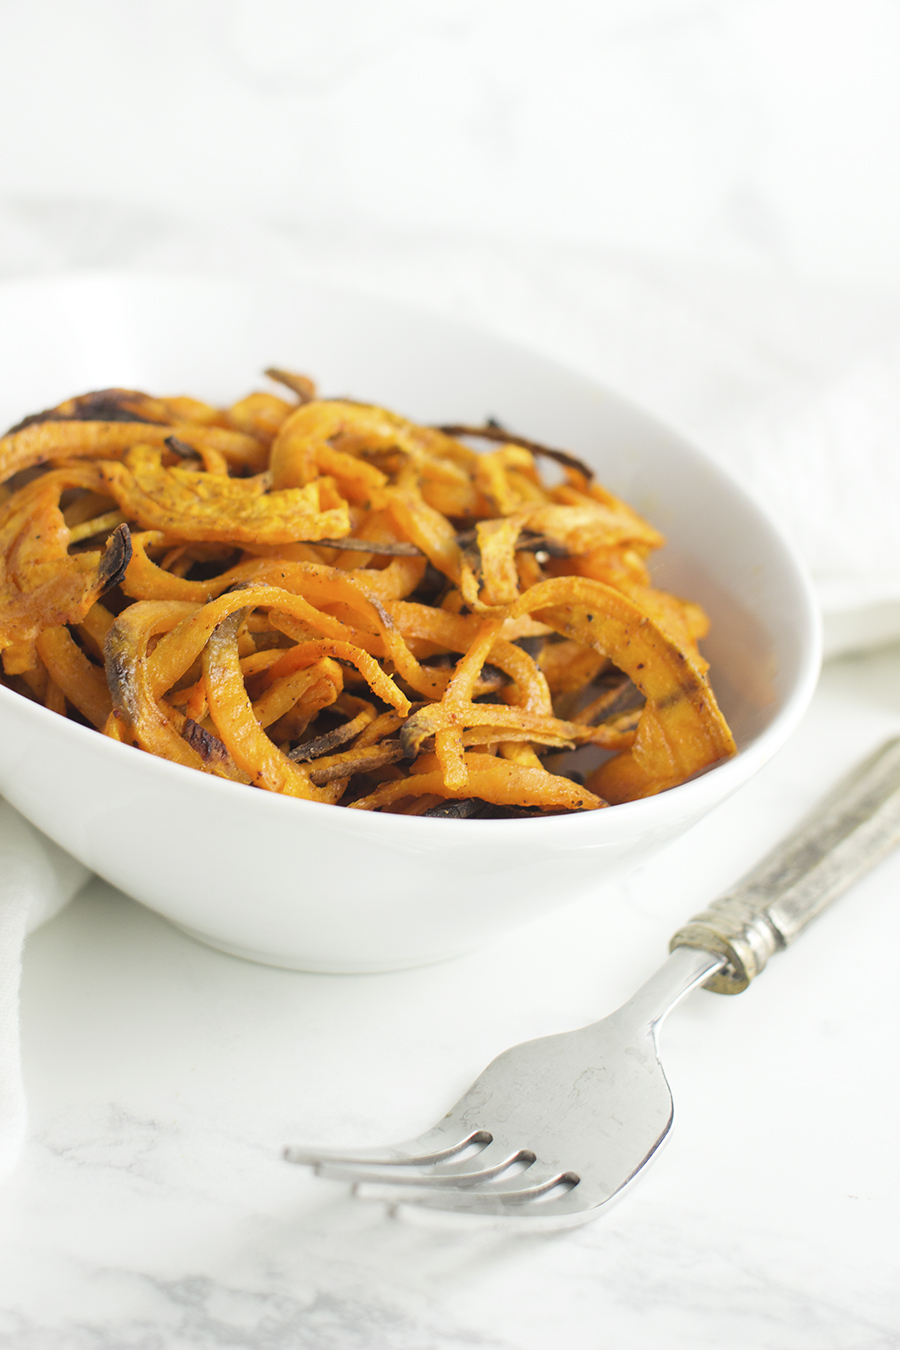 Curly Sweet Potato Fries recipe from acleanplate.com #paleo #aip #glutenfree